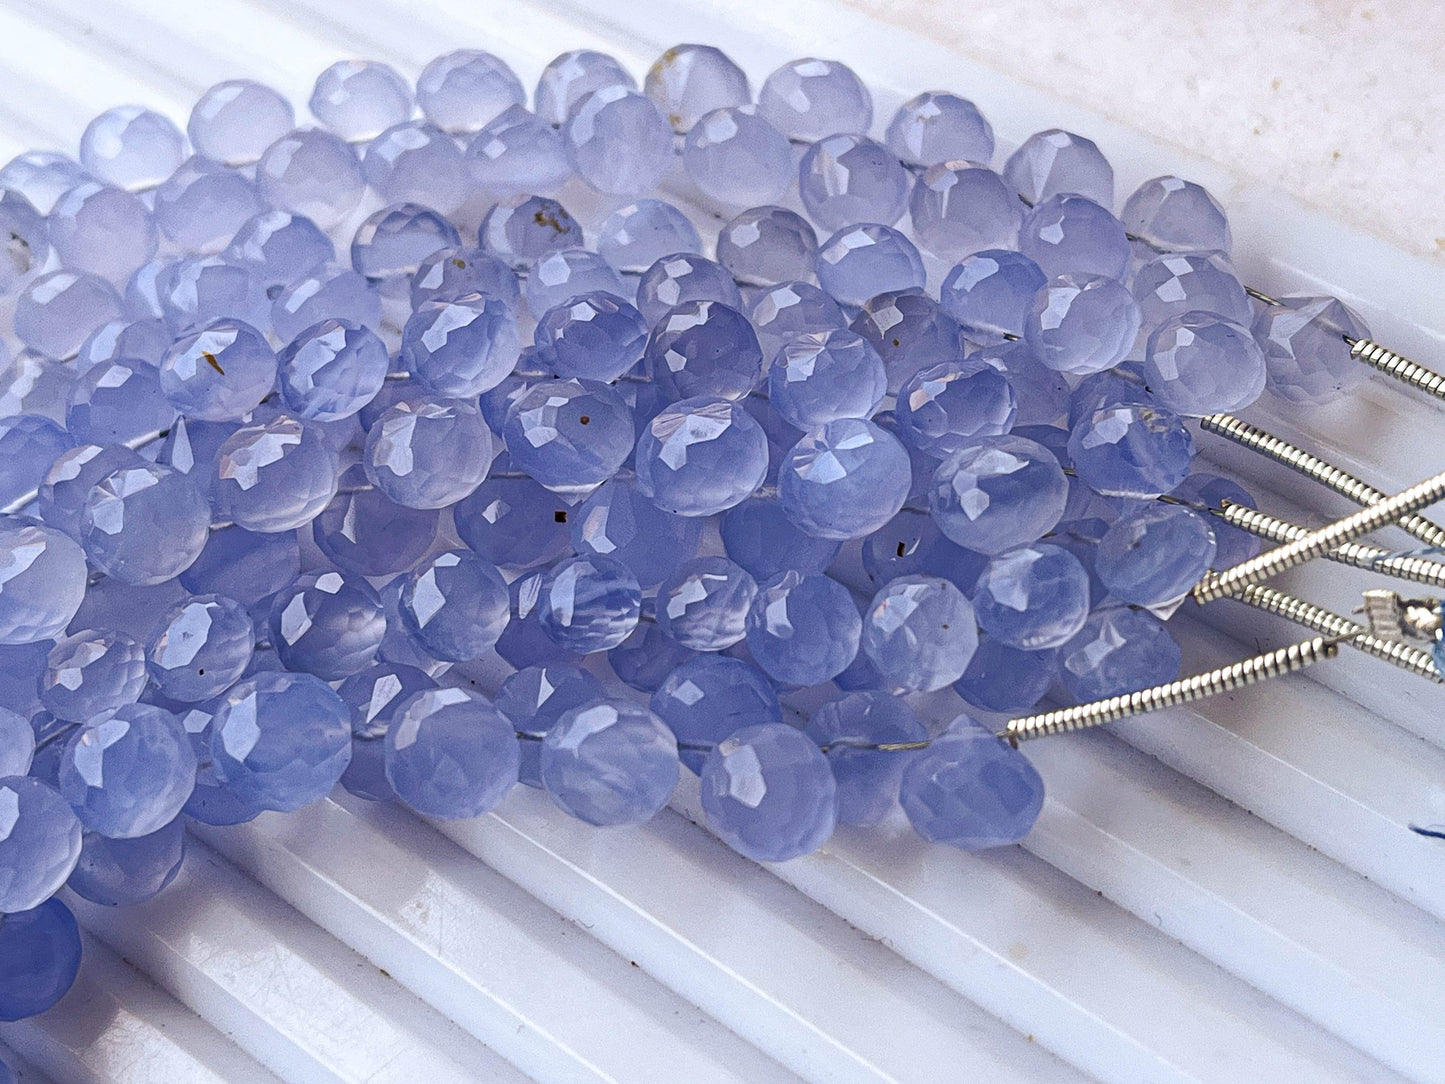 Natural Blue Chalcedony Micro faceted Onion shape Drops, Blue Chalcedony gemstone, Blue Chalcedony teardrops, Blue Chalcedony drops